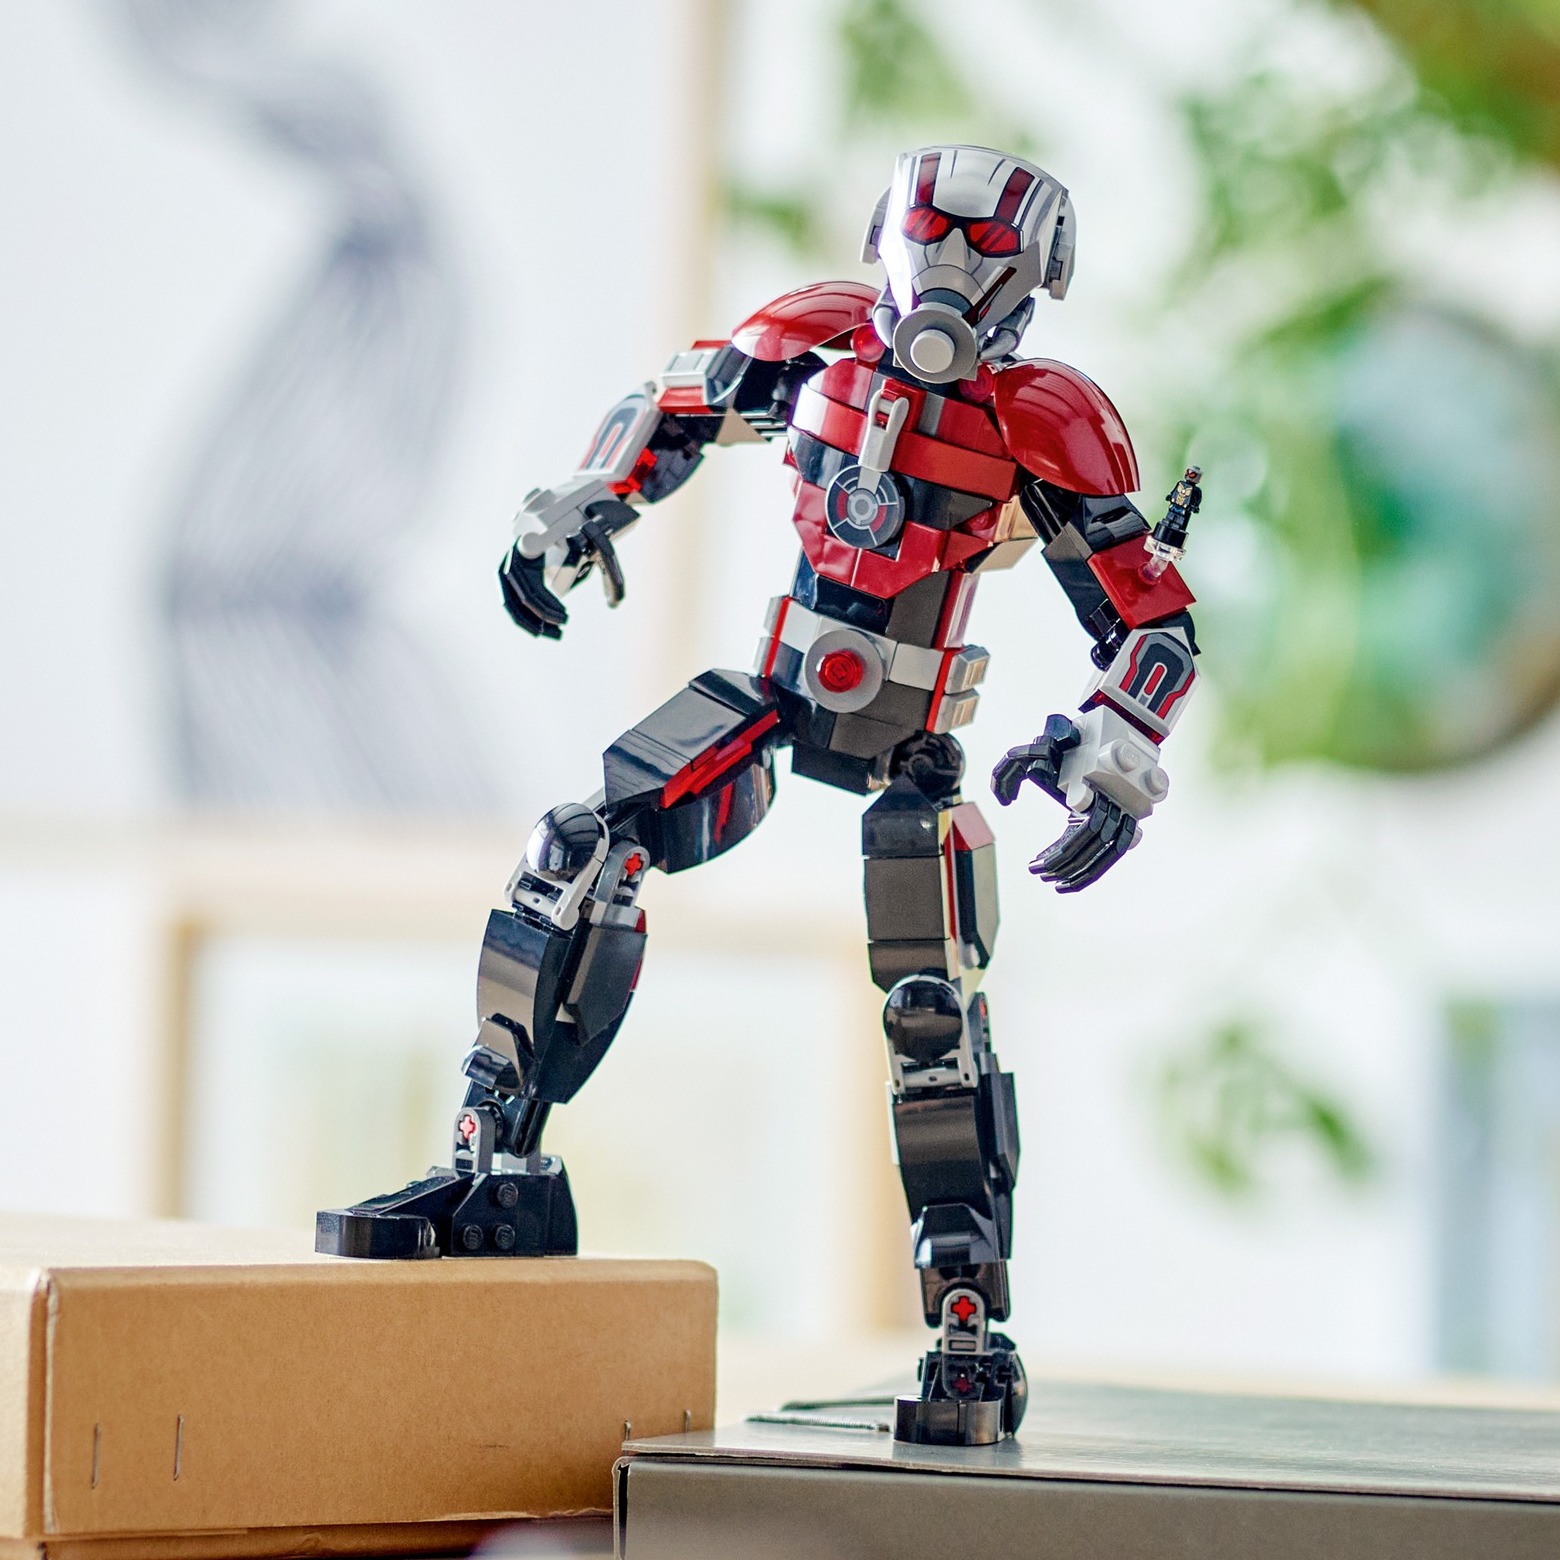 The new LEGO Marvel Ant-Man buildable figure is out